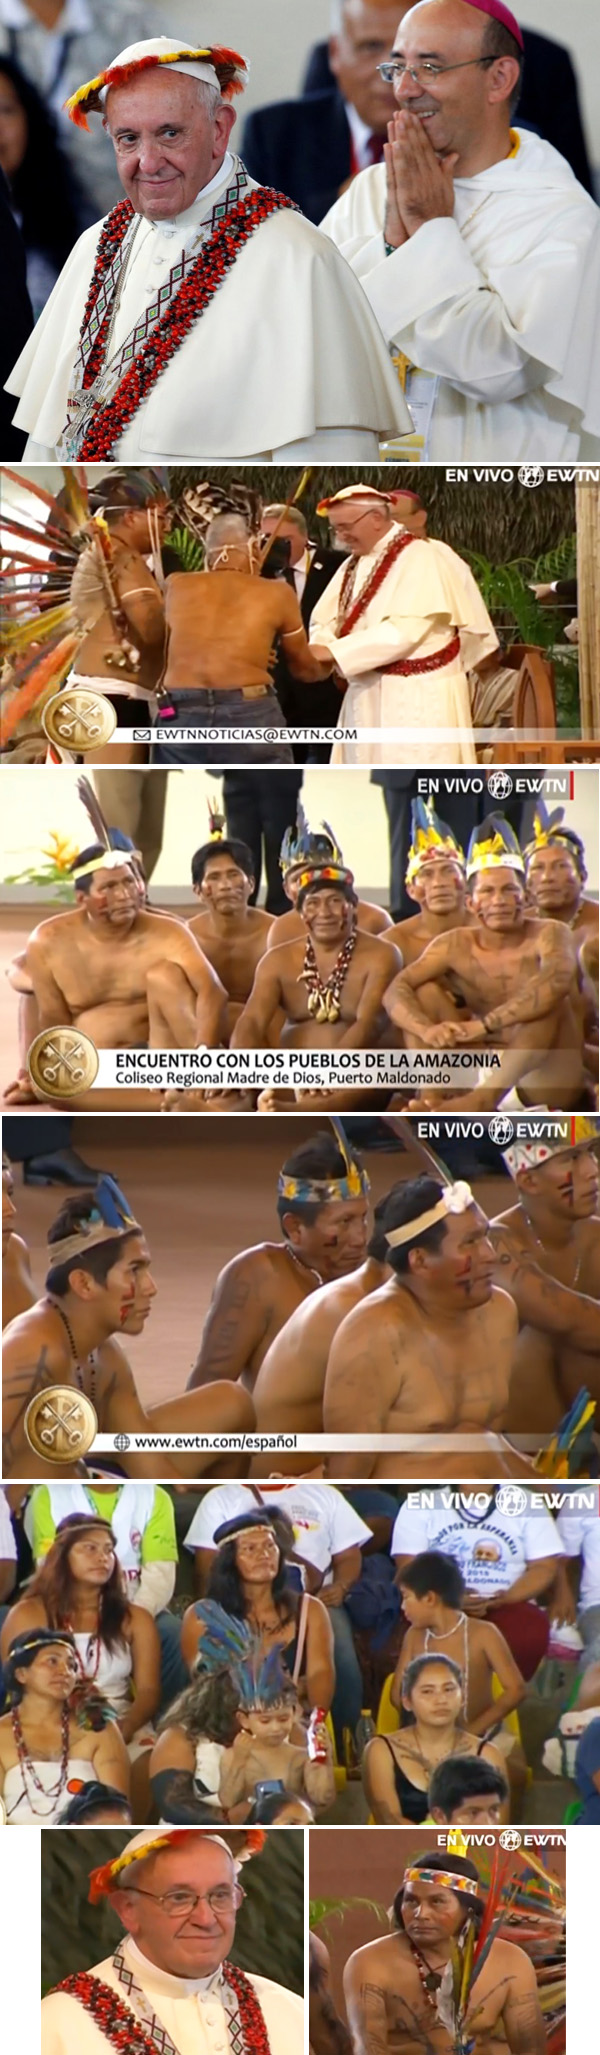 Photo montage showing the half nude native americans at the Pope's visit to Peru